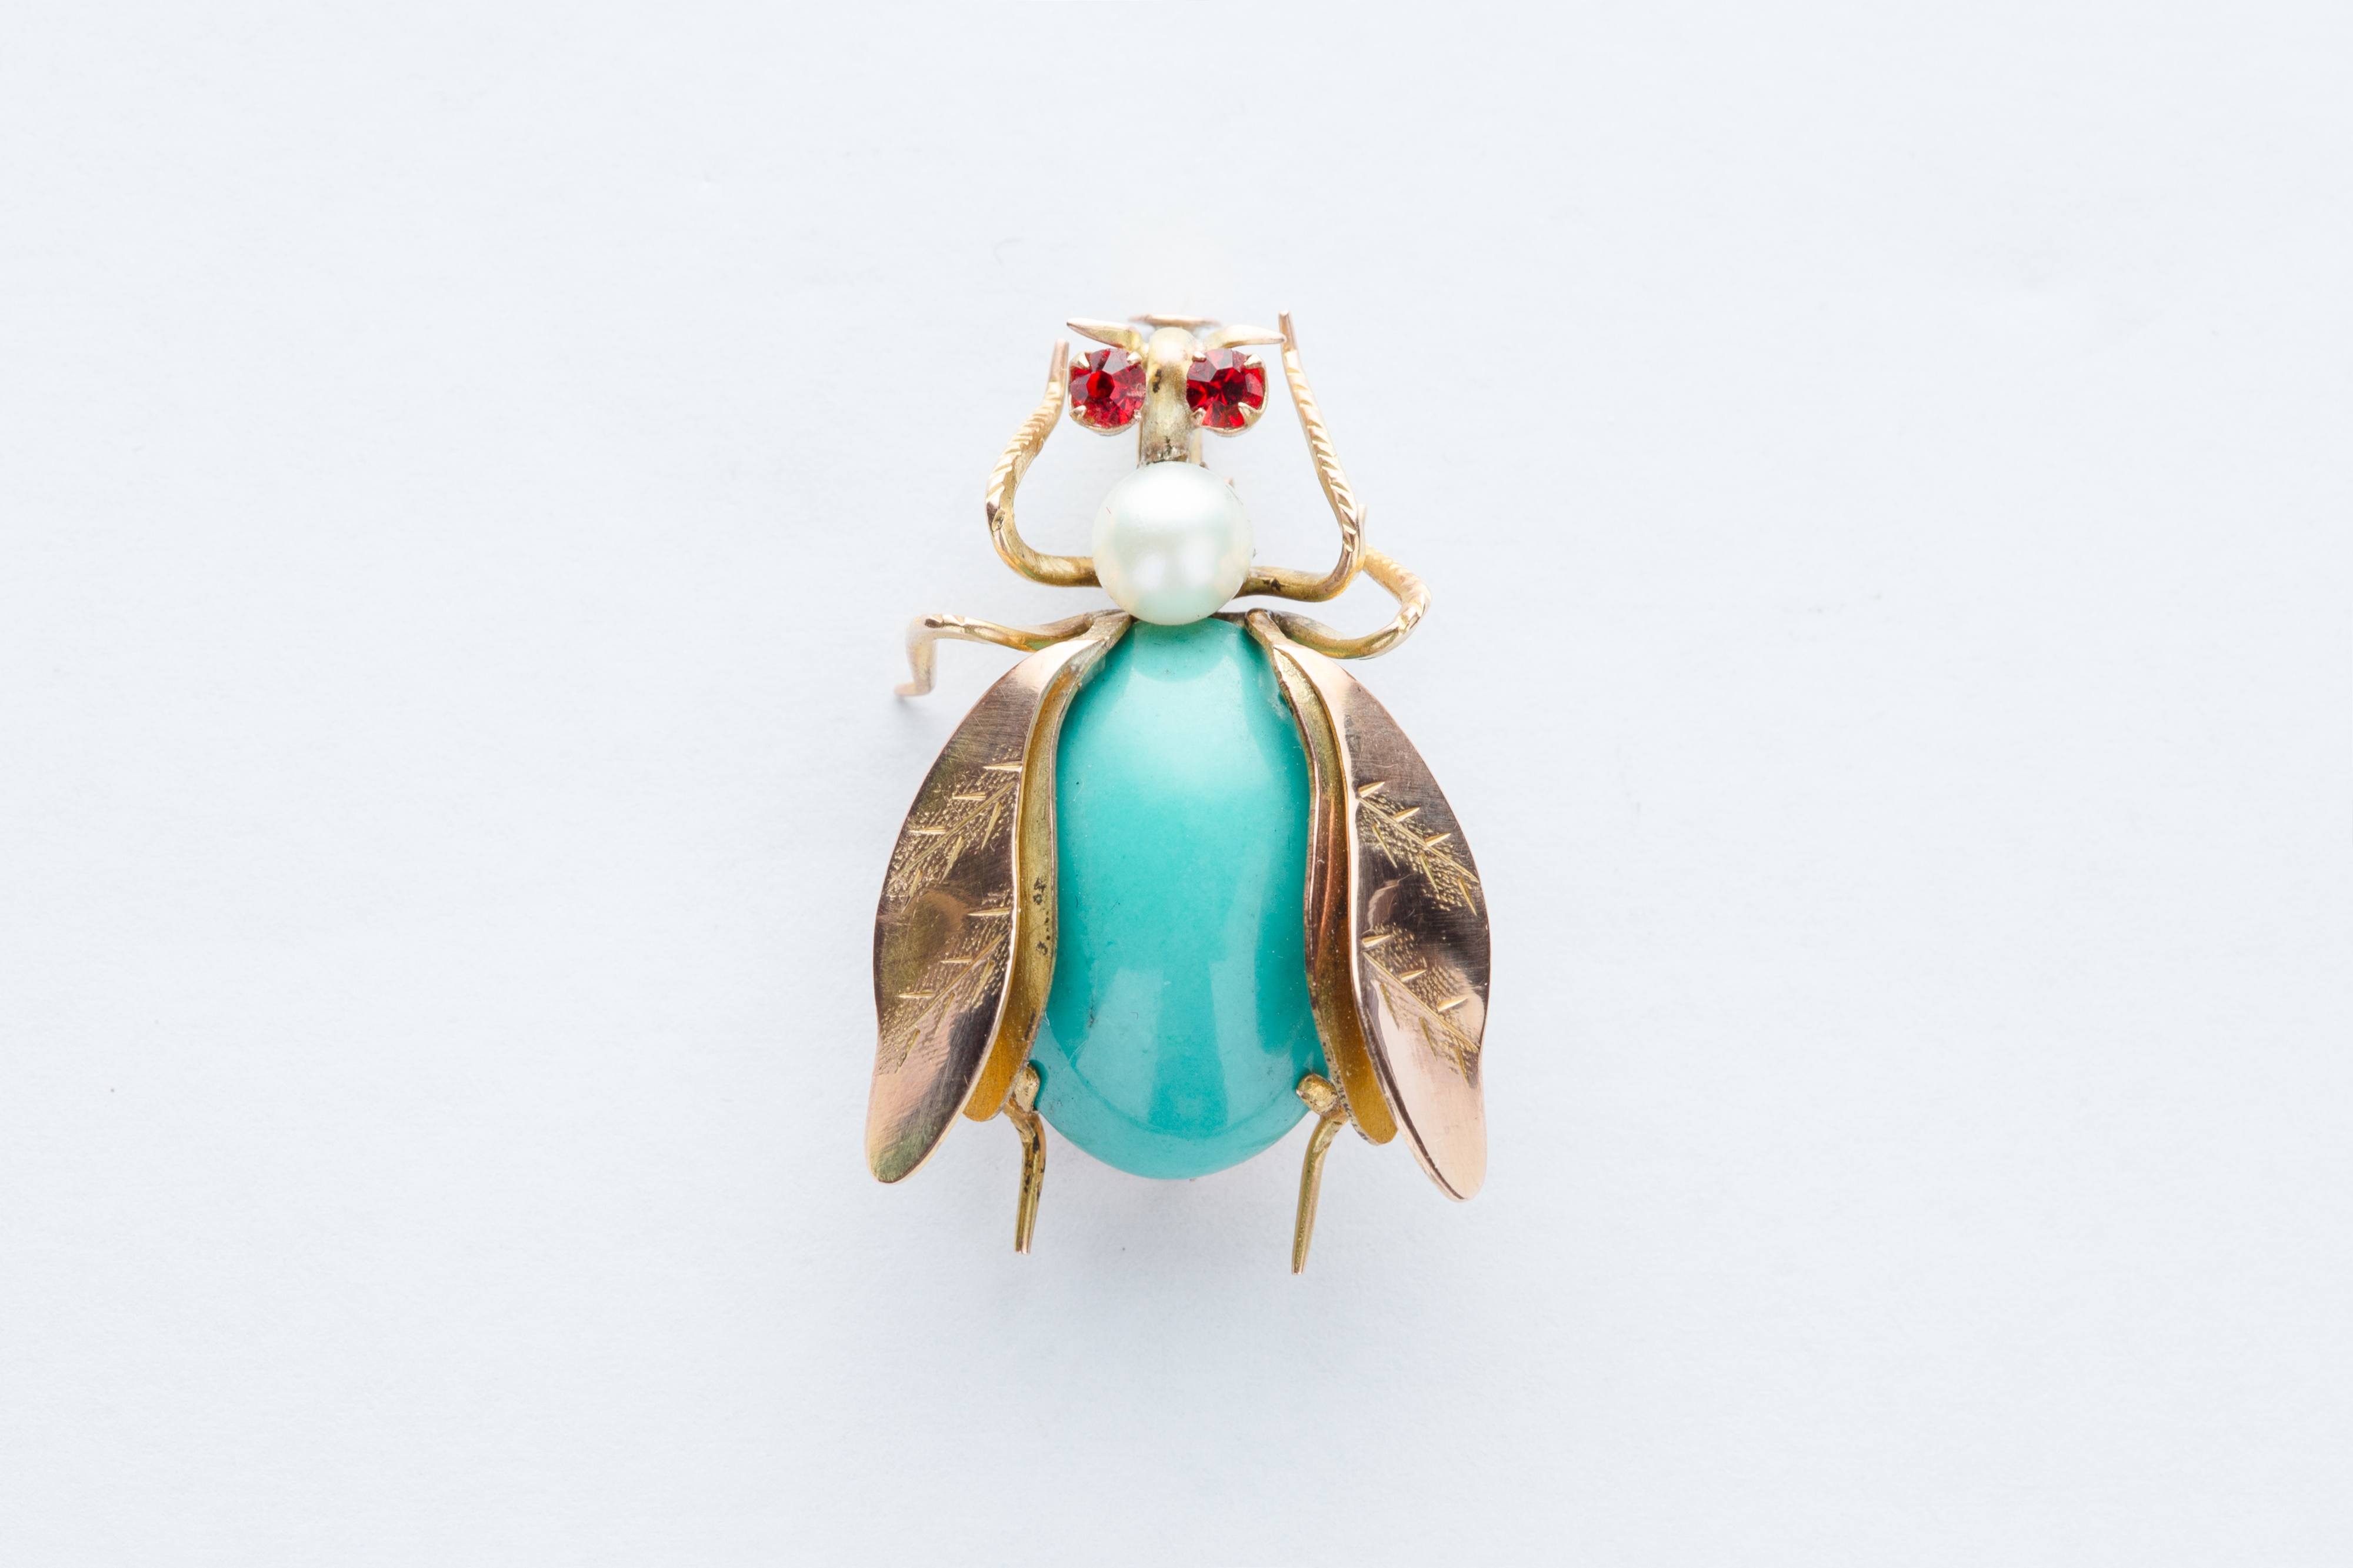 Lot 67 A 14ct Yellow Gold Turquoise Bug Brooch 